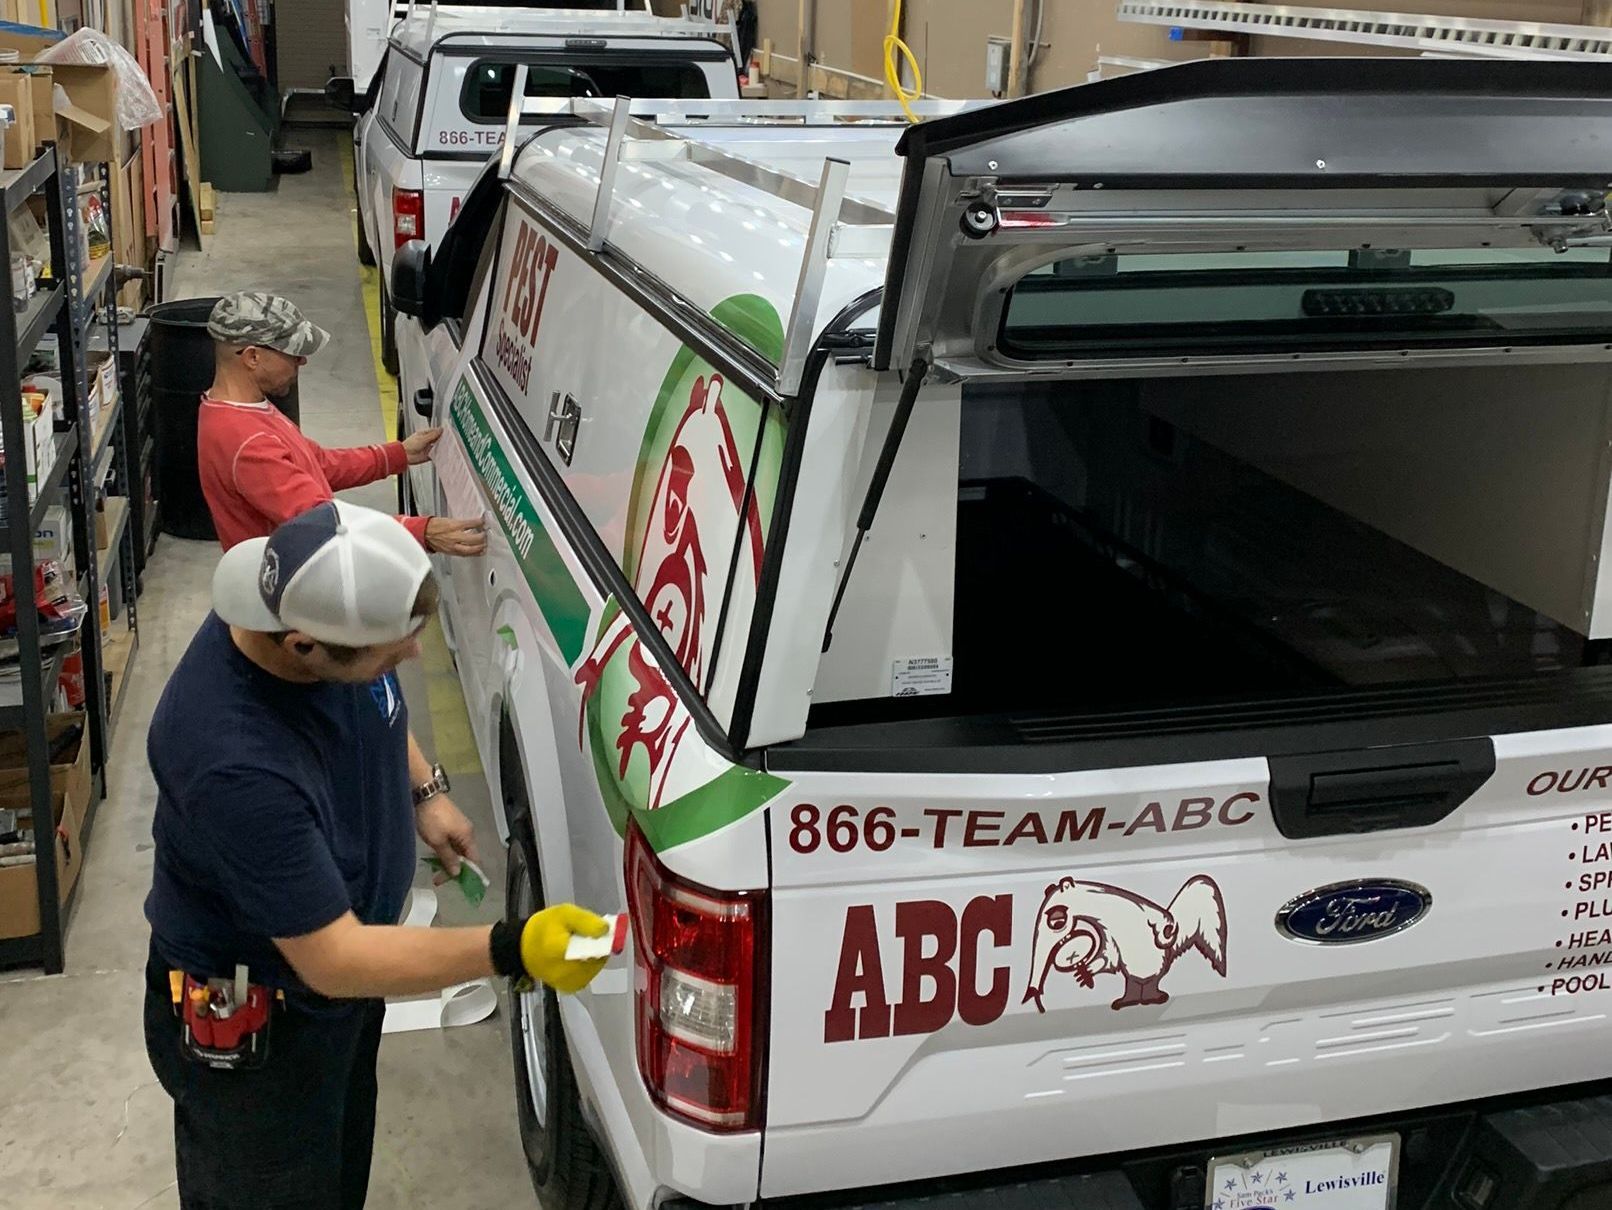 Vehicle graphics being installed in commercial install bay on fleet trucks for commercial pest control company.